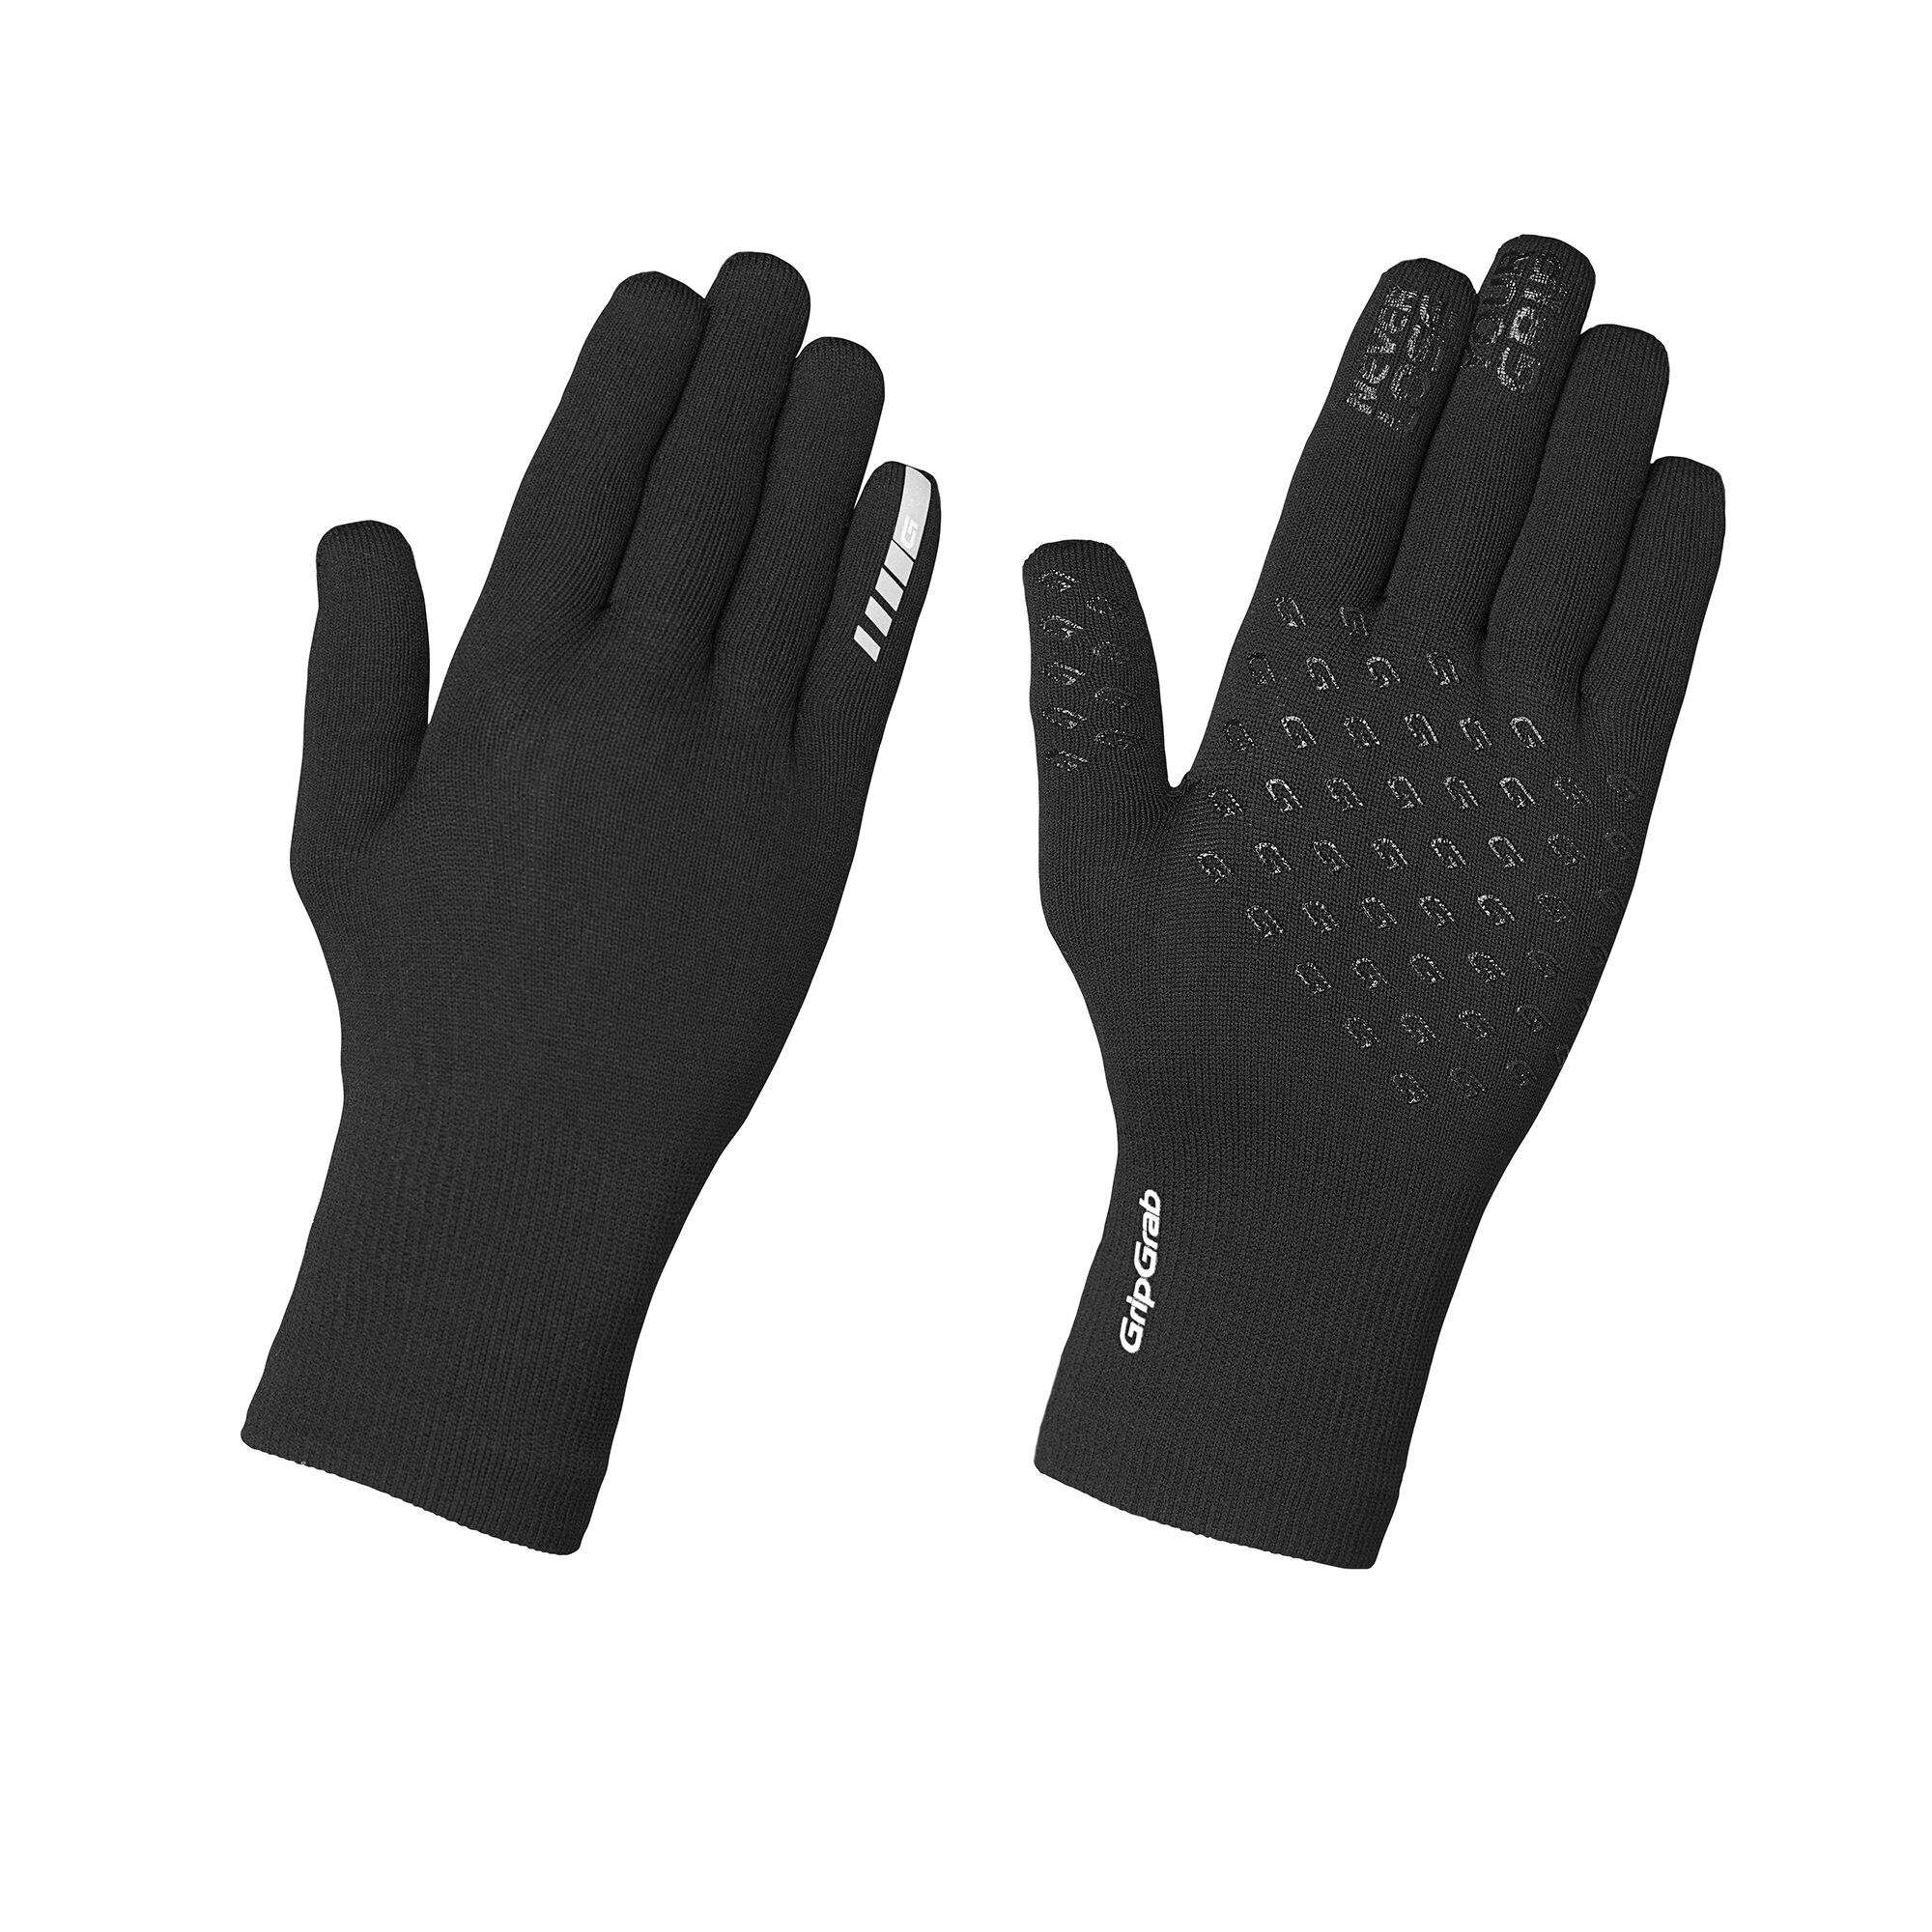 Grip Grab Waterproof Knitted Thermal Glove - Cycling gloves